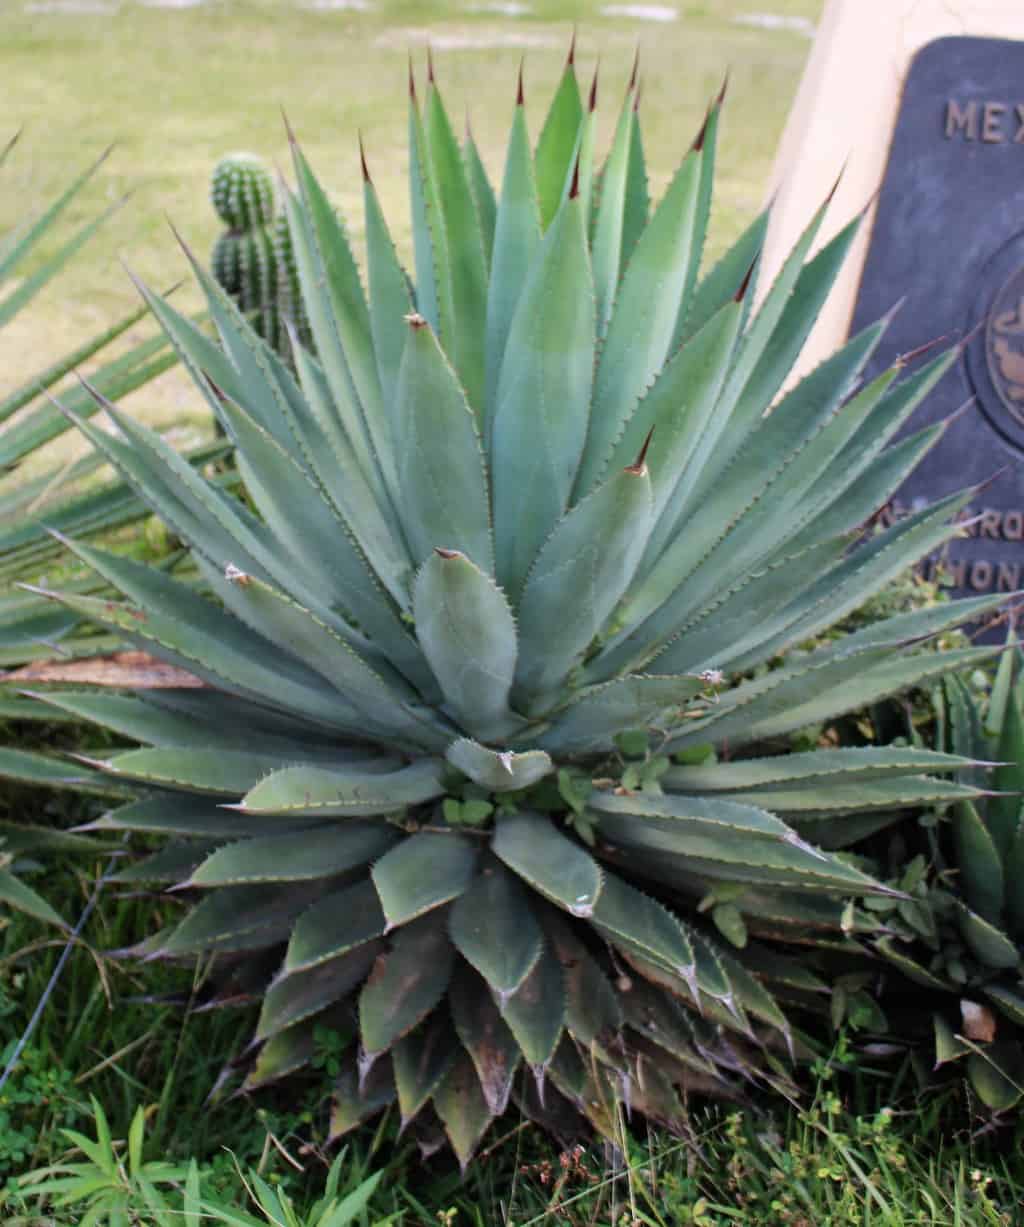 Are Agave Slow Growing?